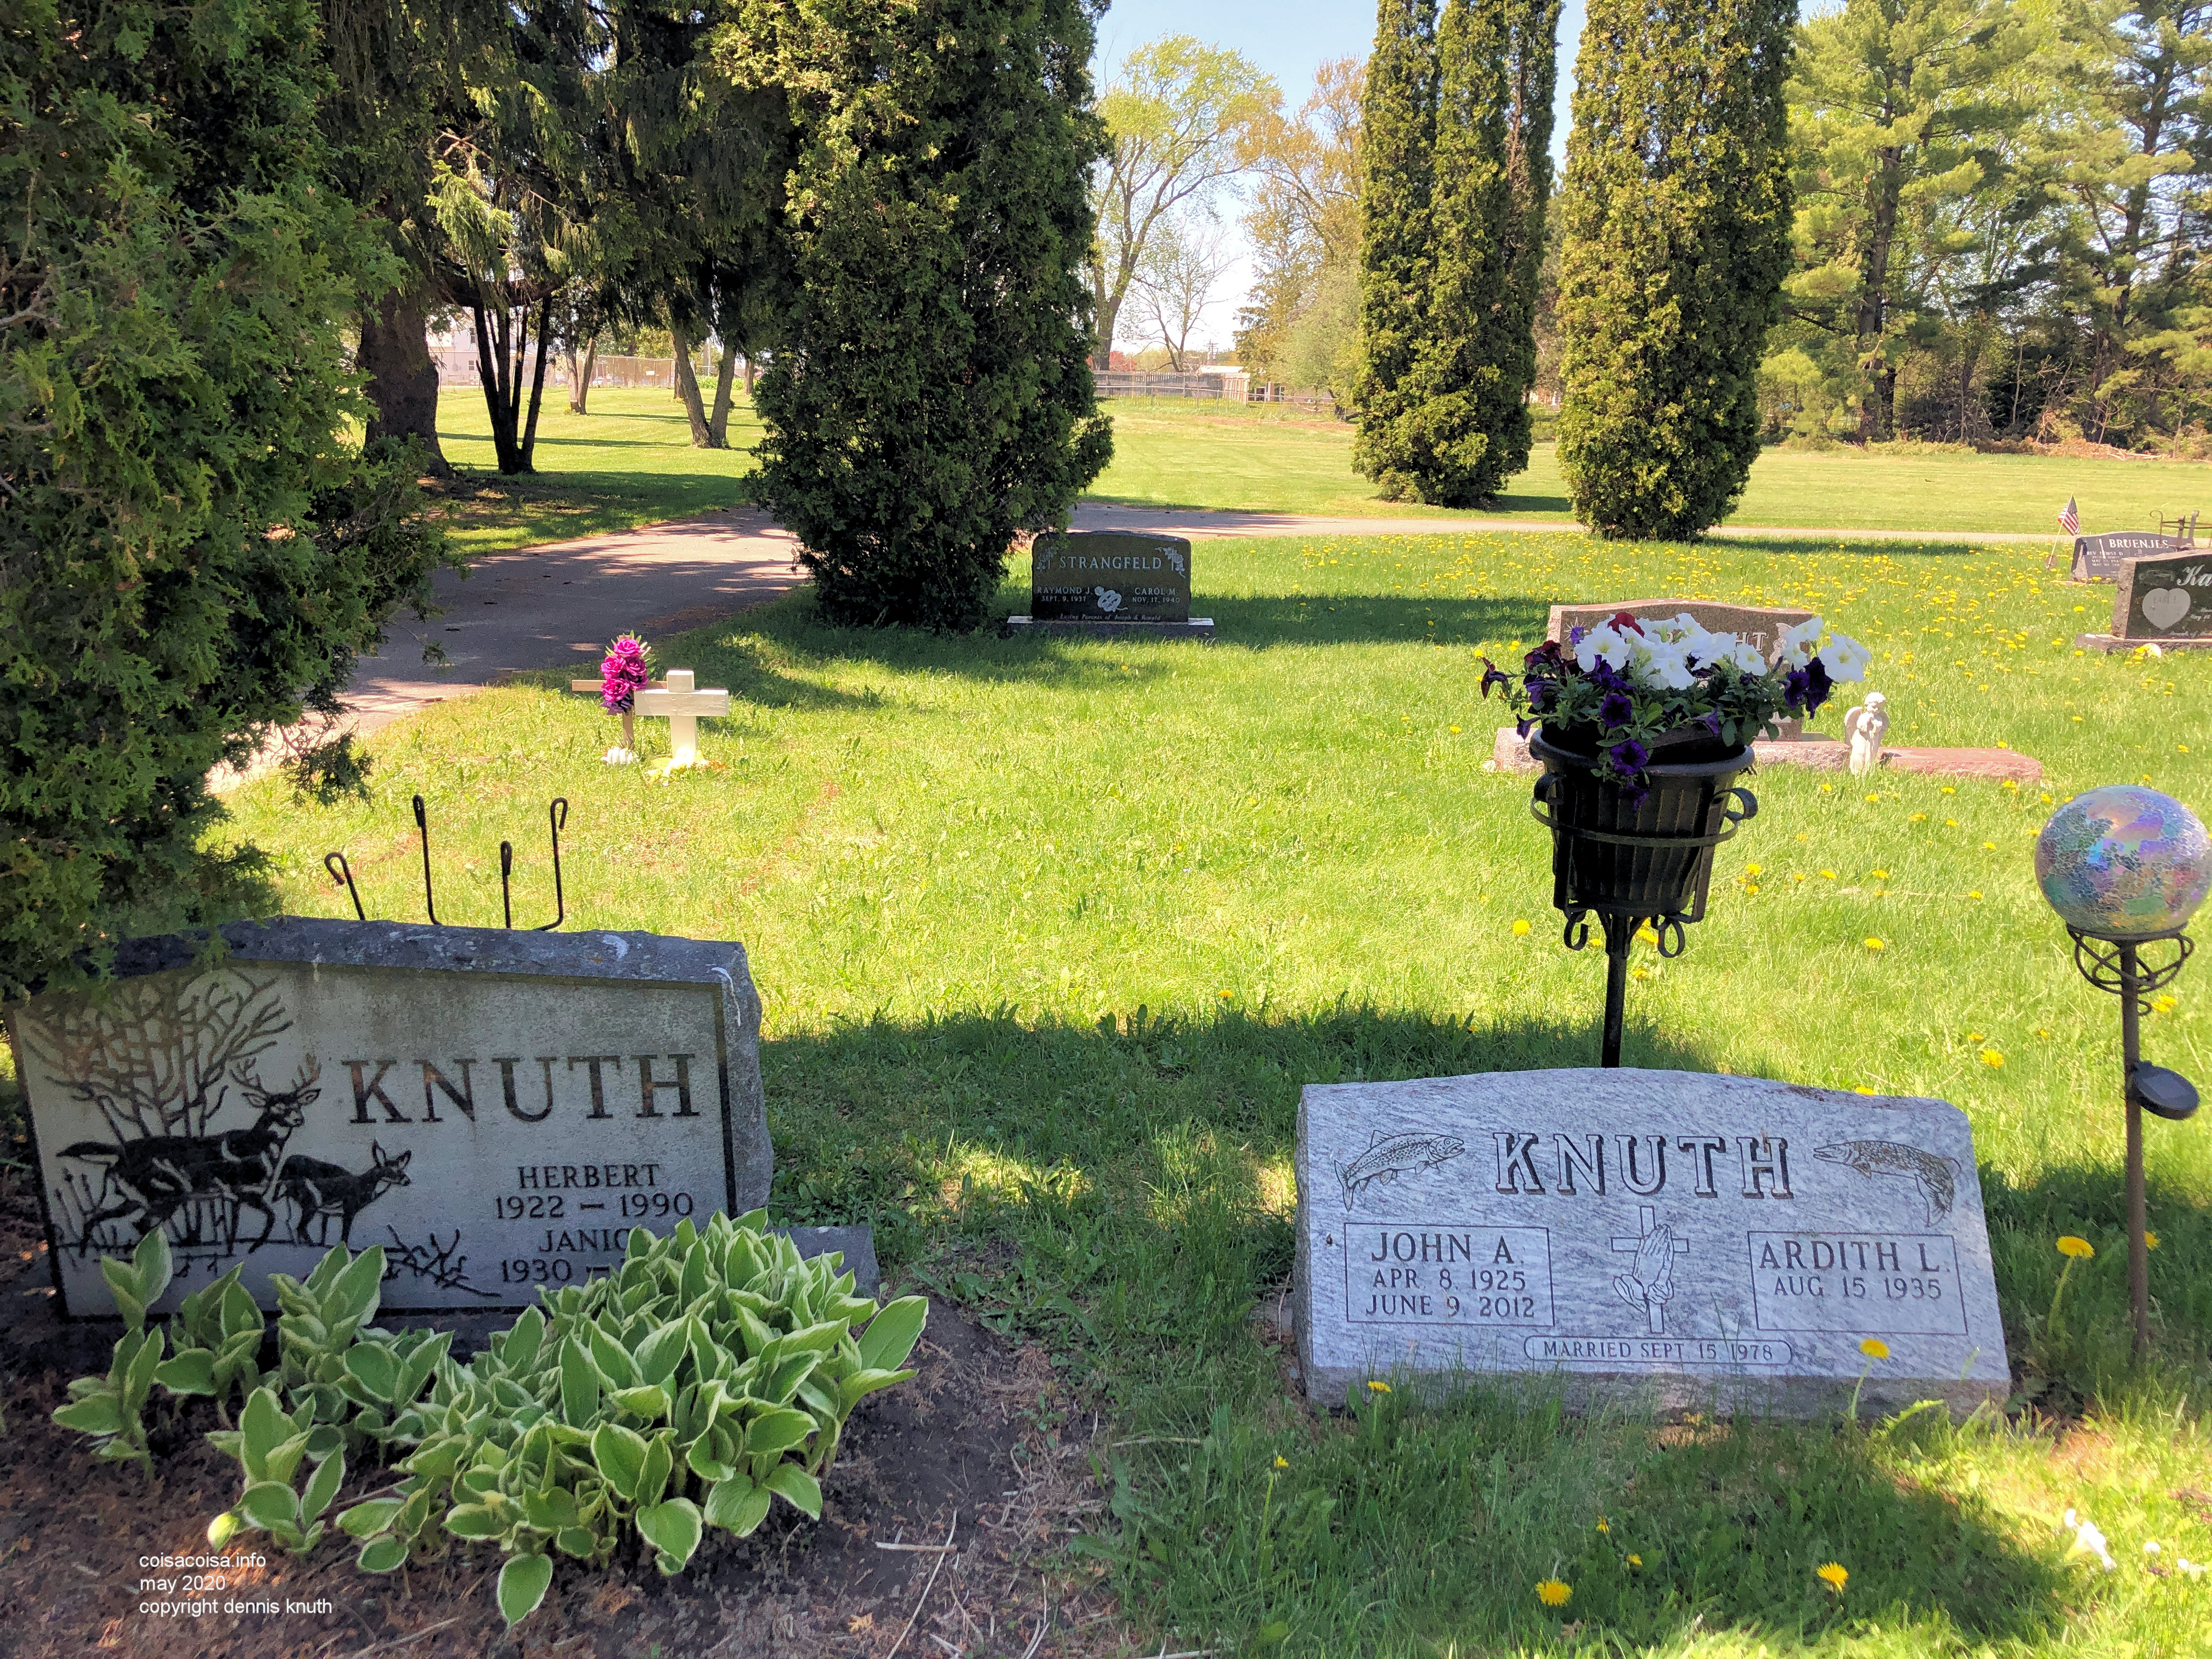 Planting some flowers on John Knuth's grave in Augusta Wisconsin